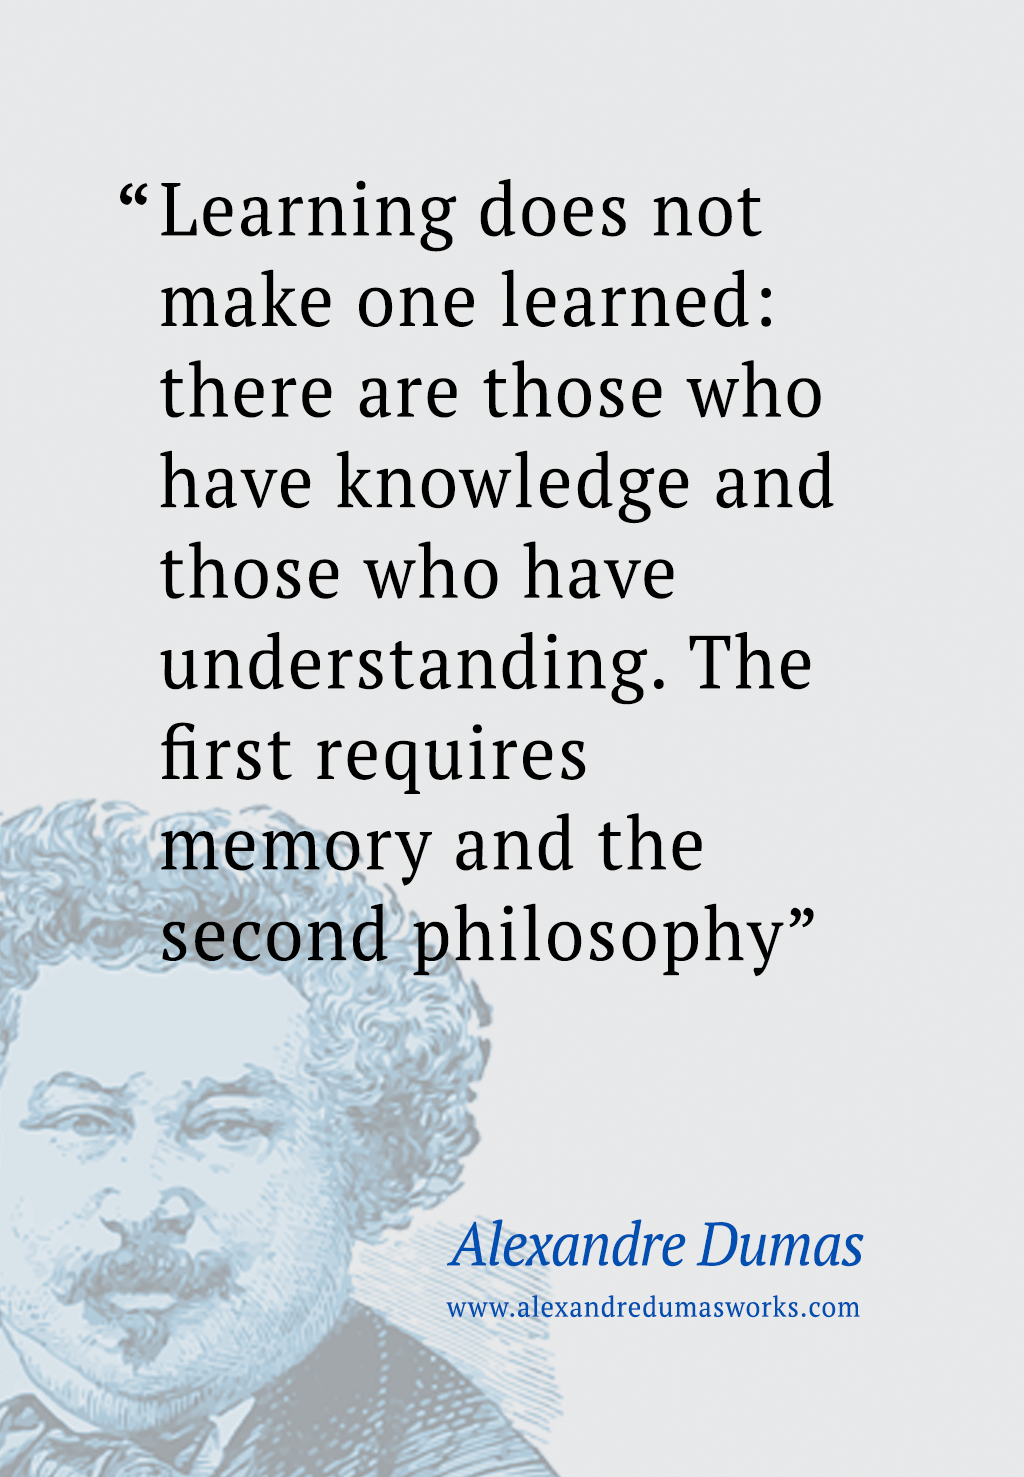 “Learning does not make one learned: there are those who have knowledge and those who have understanding. The first requires memory and the second philosophy” ― Alexandre Dumas